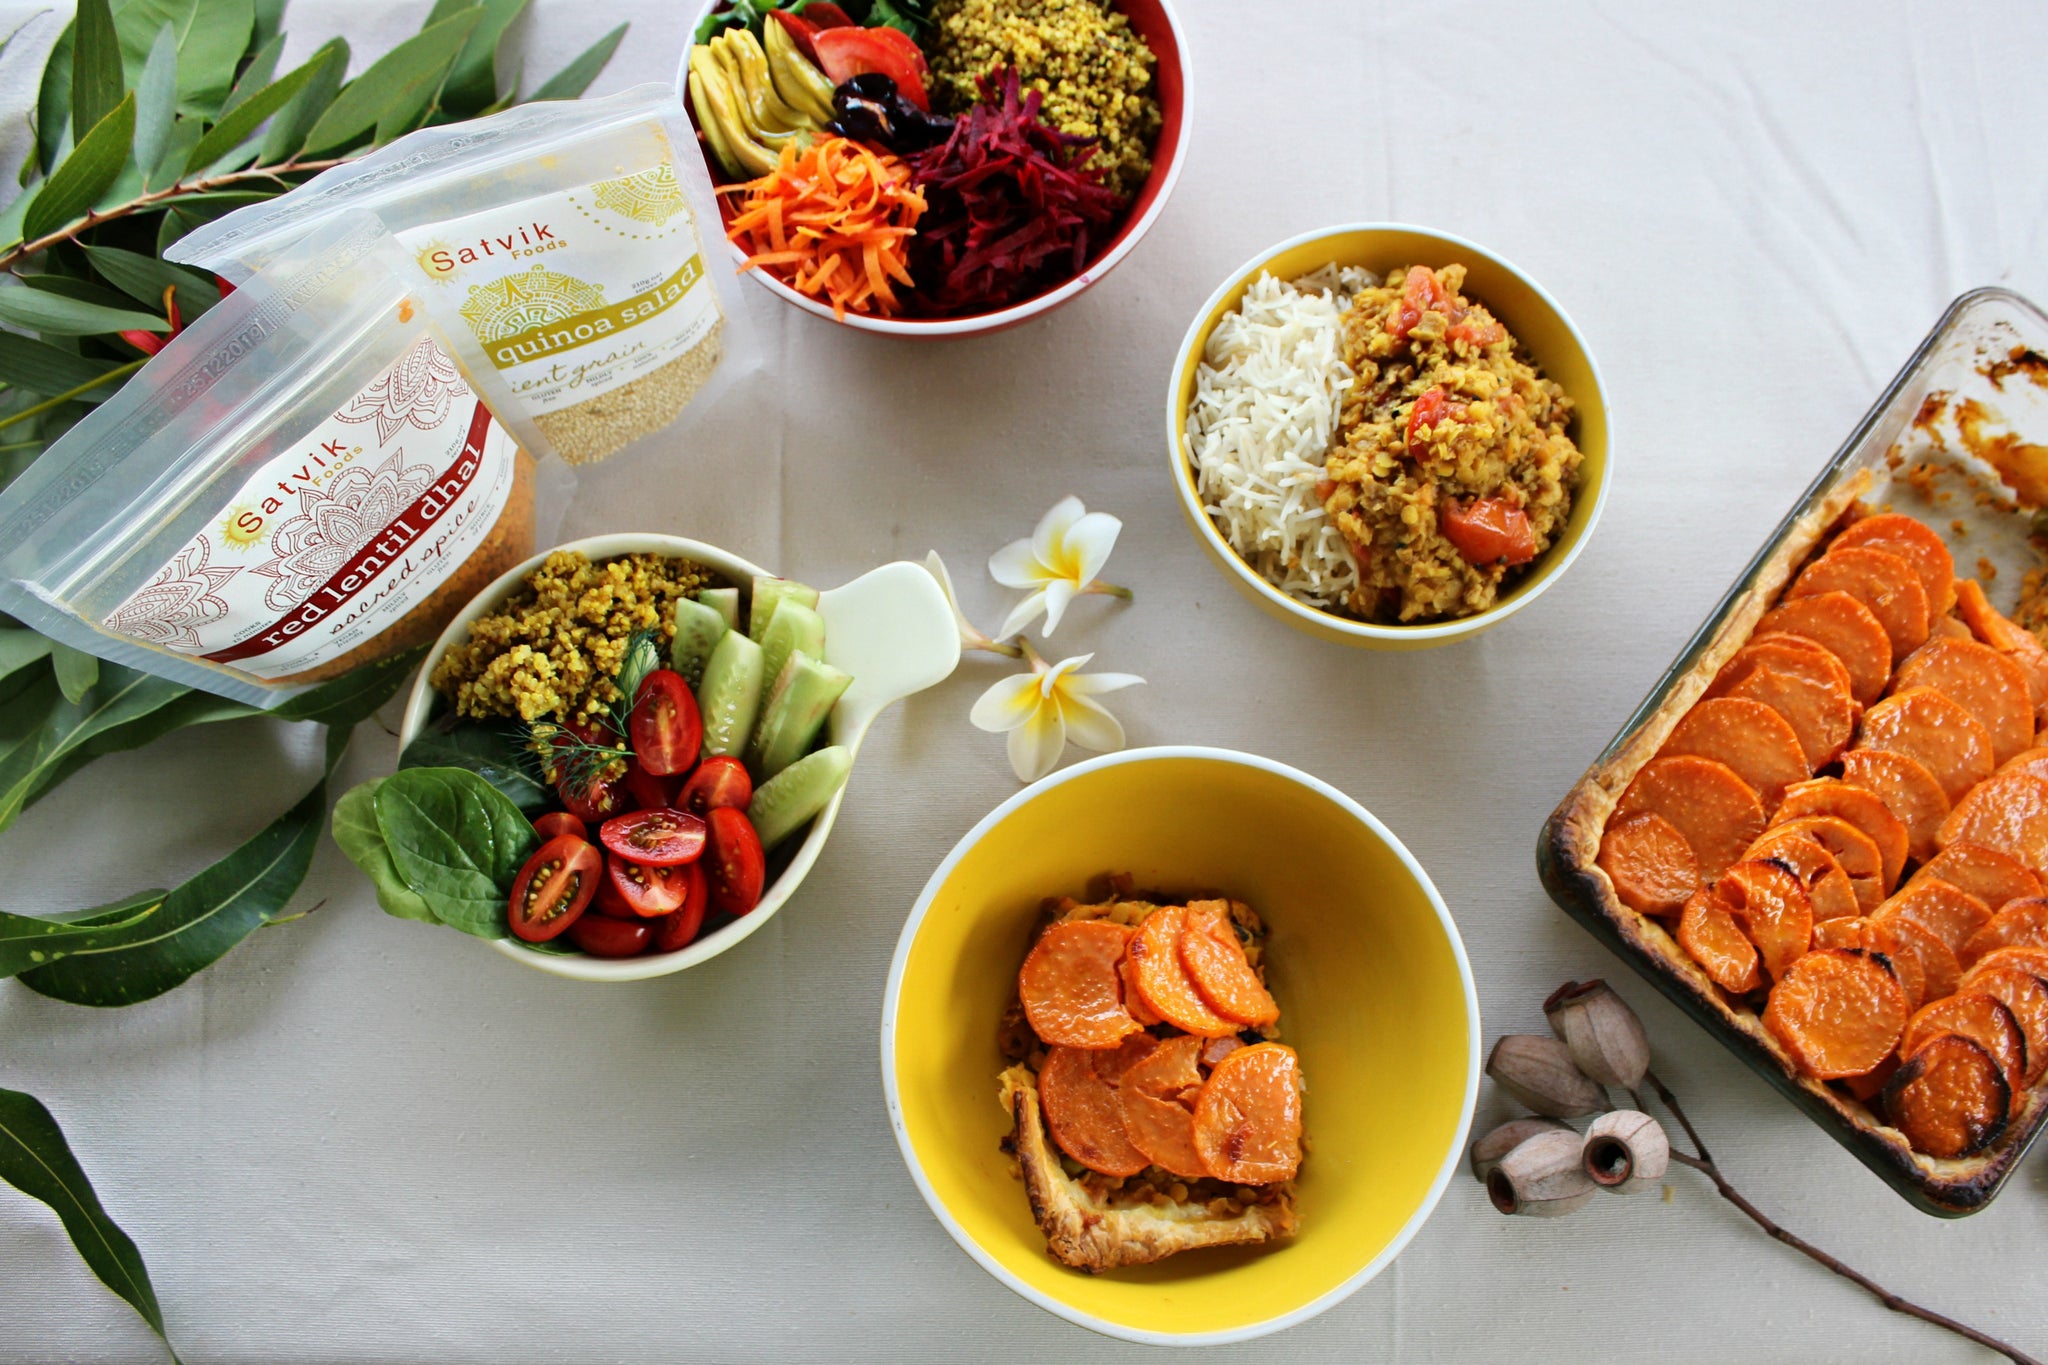 Satvik Foods Bundle Special is a collection of our healthy and delicious easy make-at-home meal packs. The bundle includes 6 different products: Red Lentil Dhal, Yellow Moong Dhal, Green Moong Dhal, Royal Rice, Chilli Red Lentil and Organic Quinoa. Each product is made with Australian grown grains, non-GMO ingredients and a blend of unique Ayurvedic spice blends.